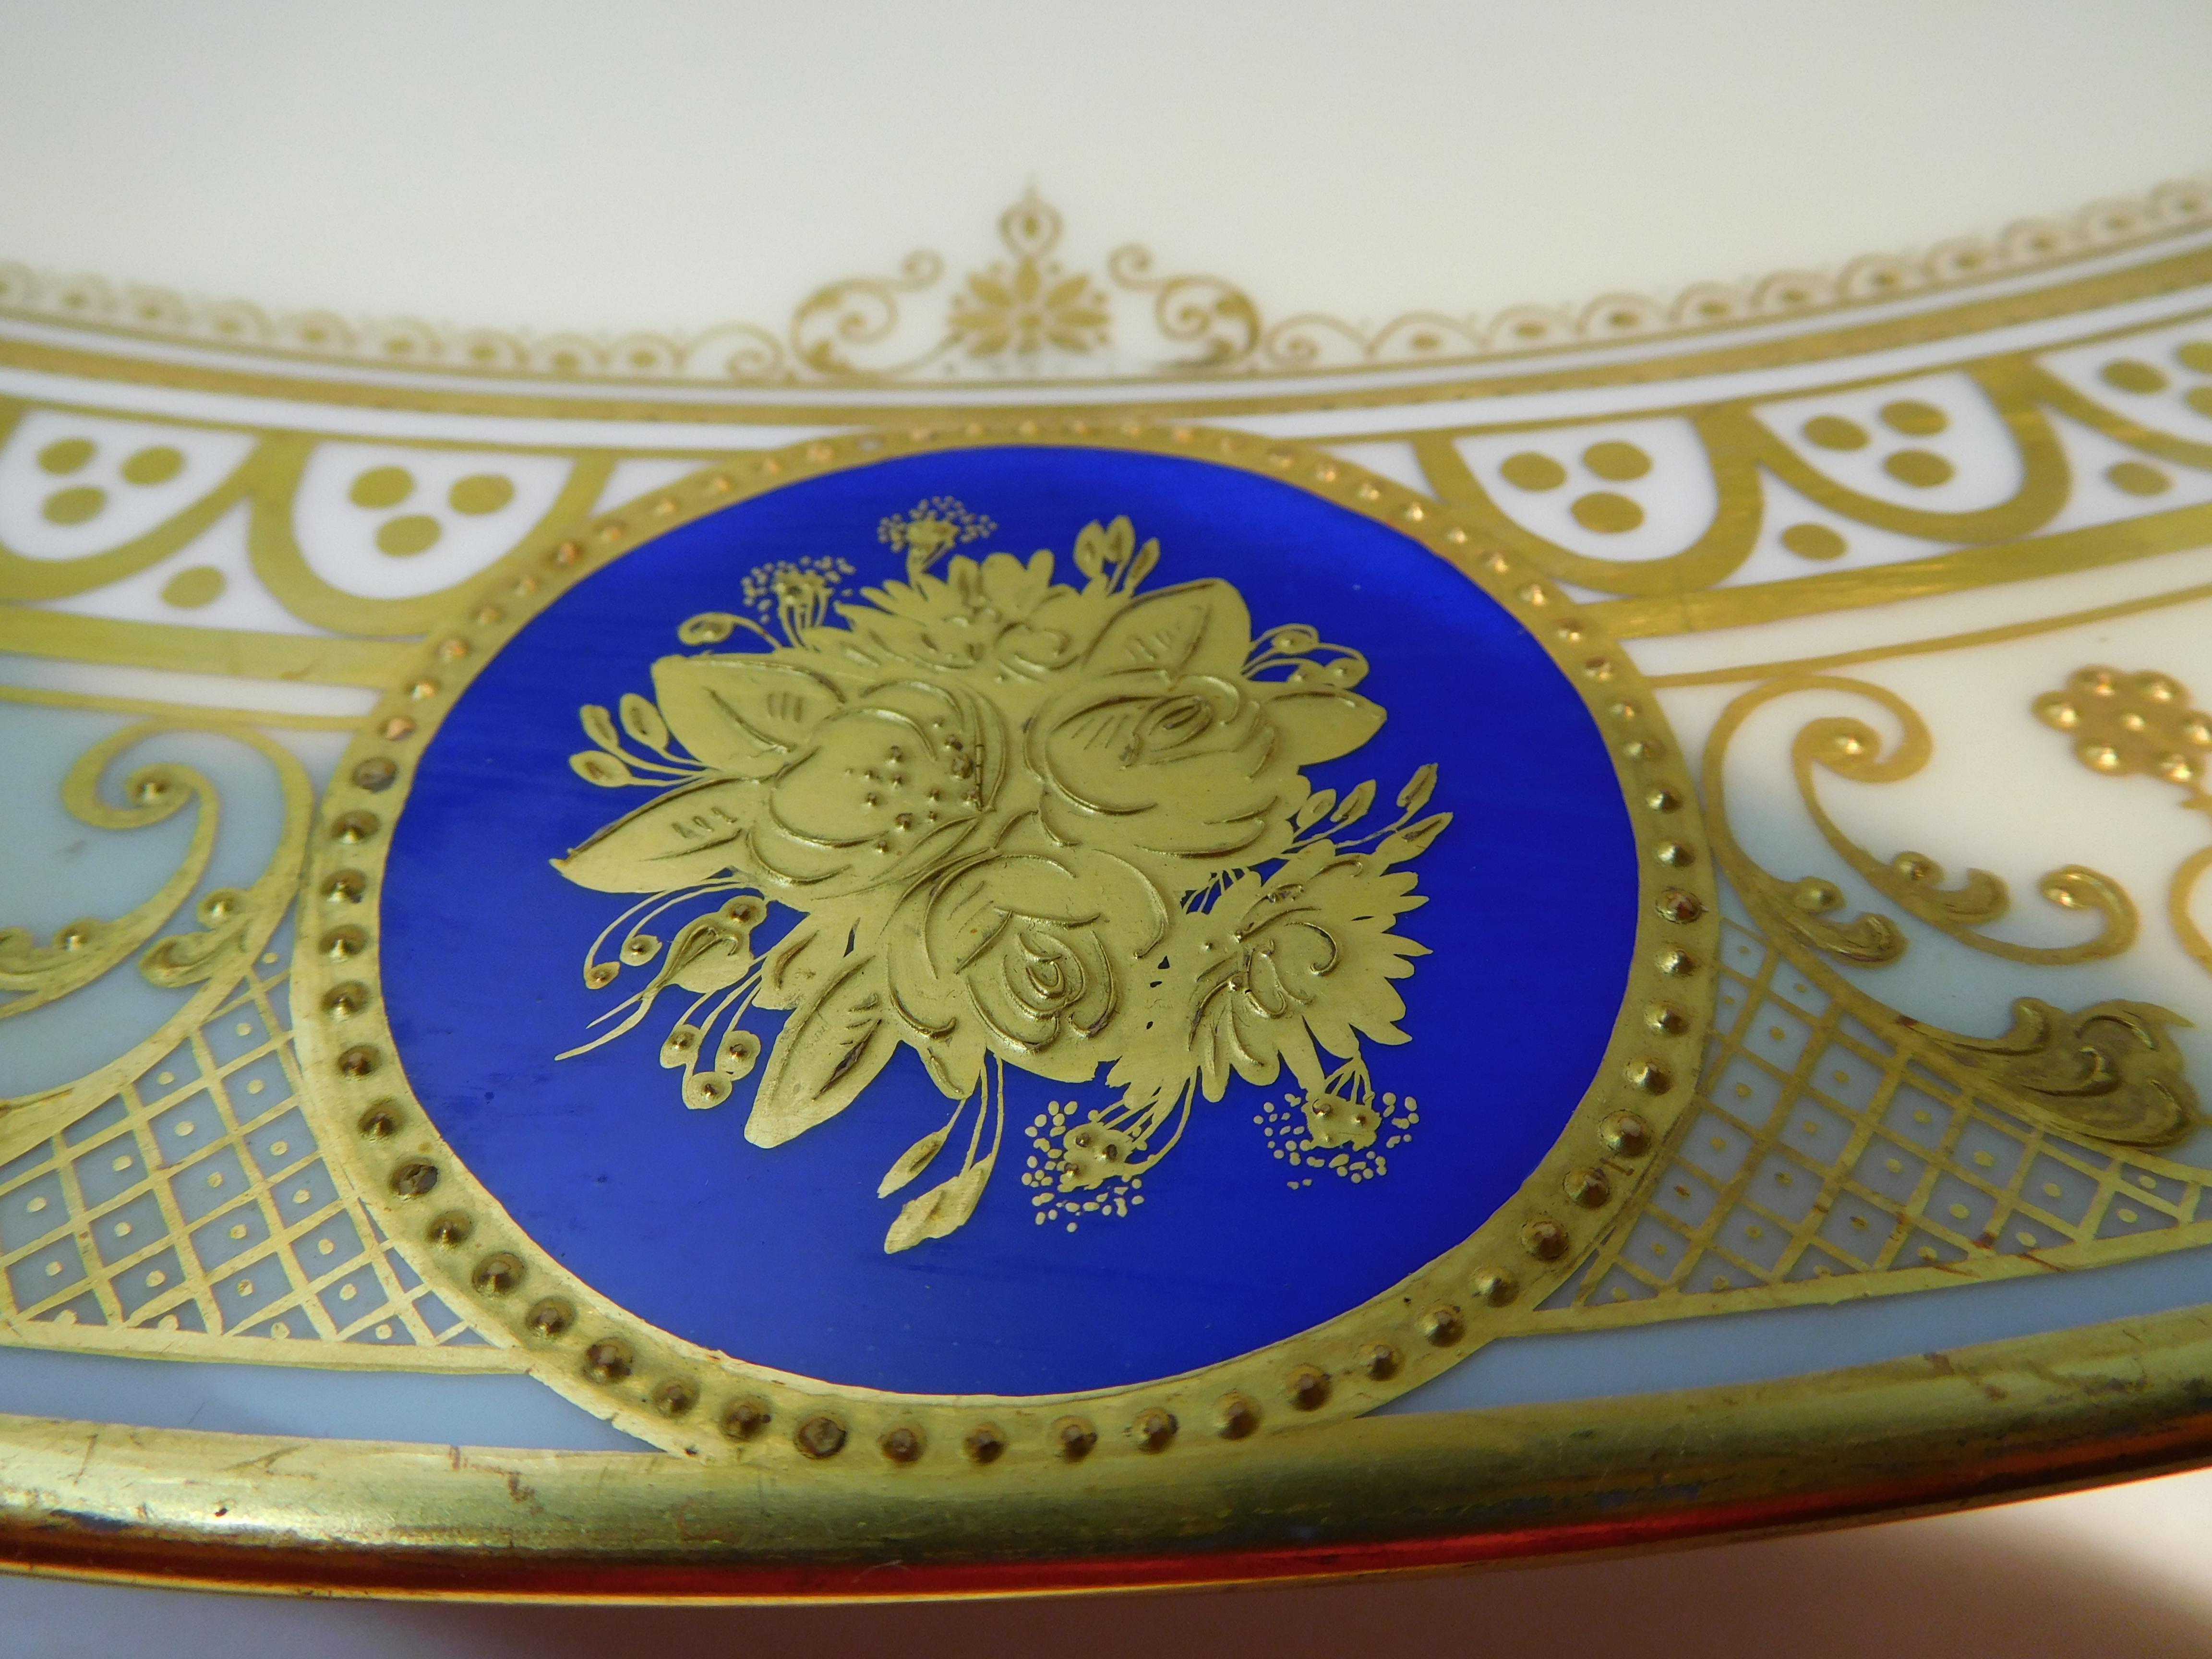 Early 20th Century Dresden Porcelain Platter with Gold Incrustation by Ambrosius Lamm, circa 1900